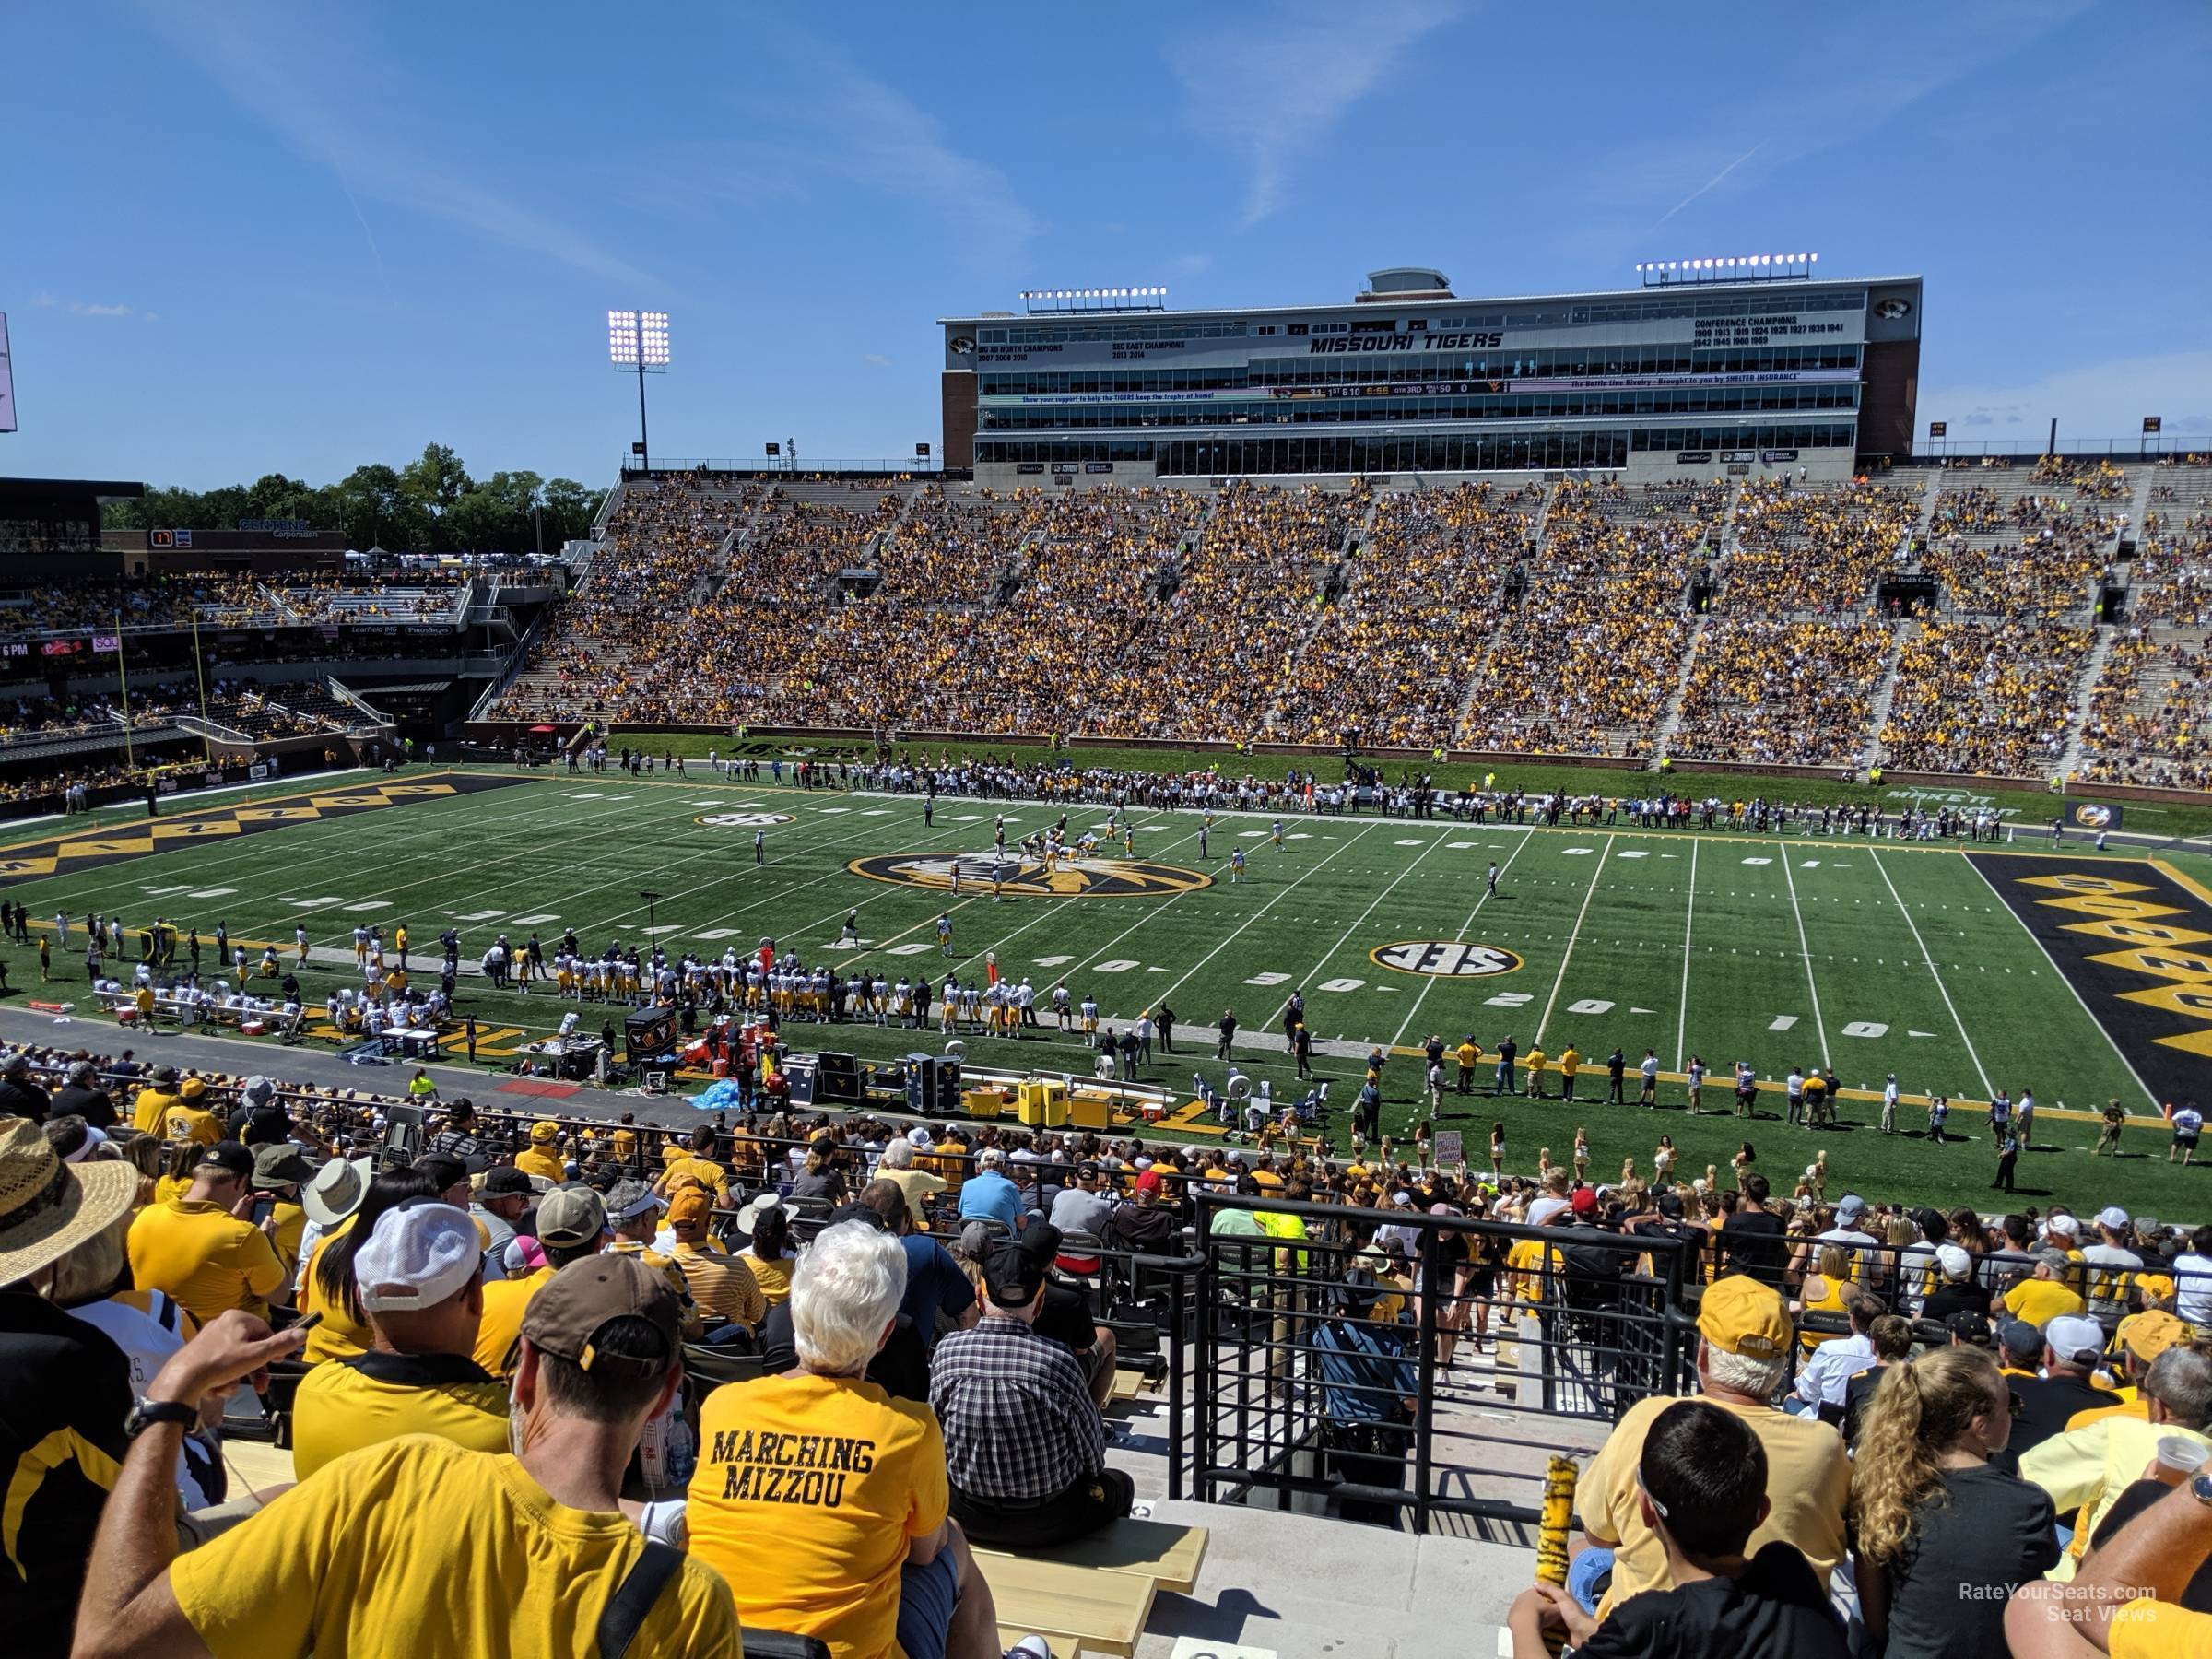 section 108, row 54 seat view  - faurot field